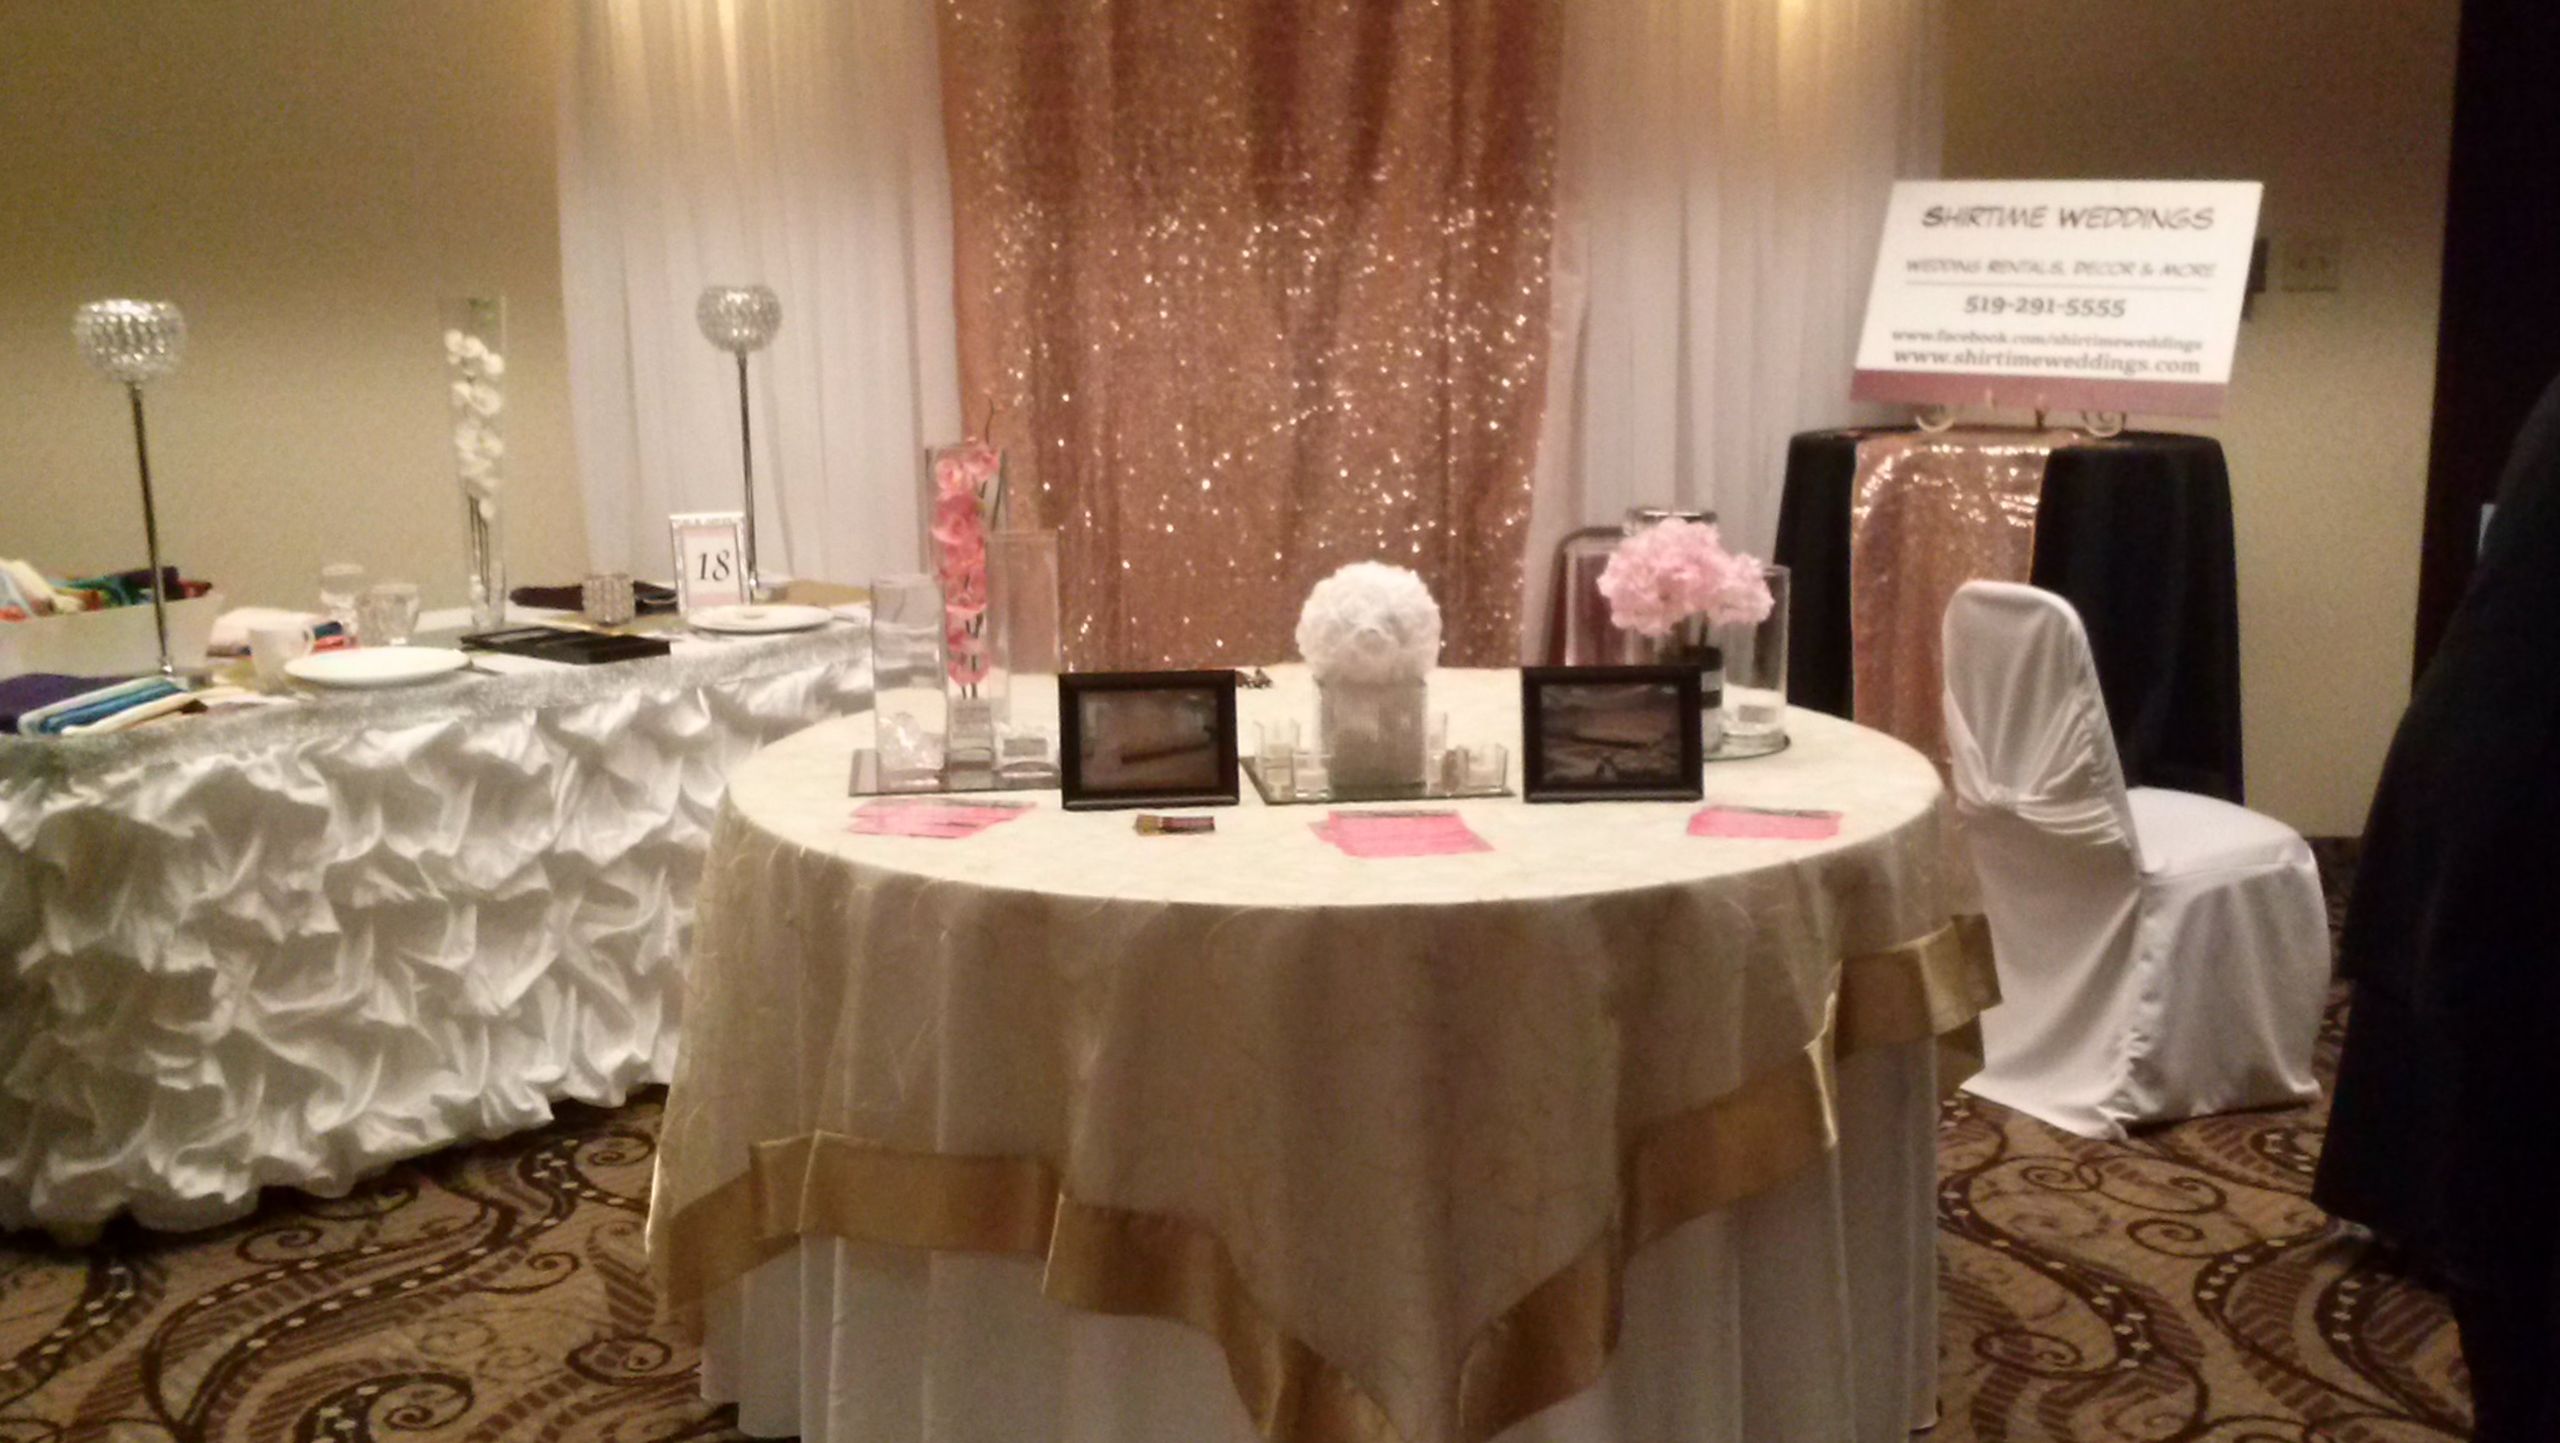 Rental Centerpieces, Easels, Table Numbers, Mirrors and More - Shirtime  Weddings Rentals, Decor & More